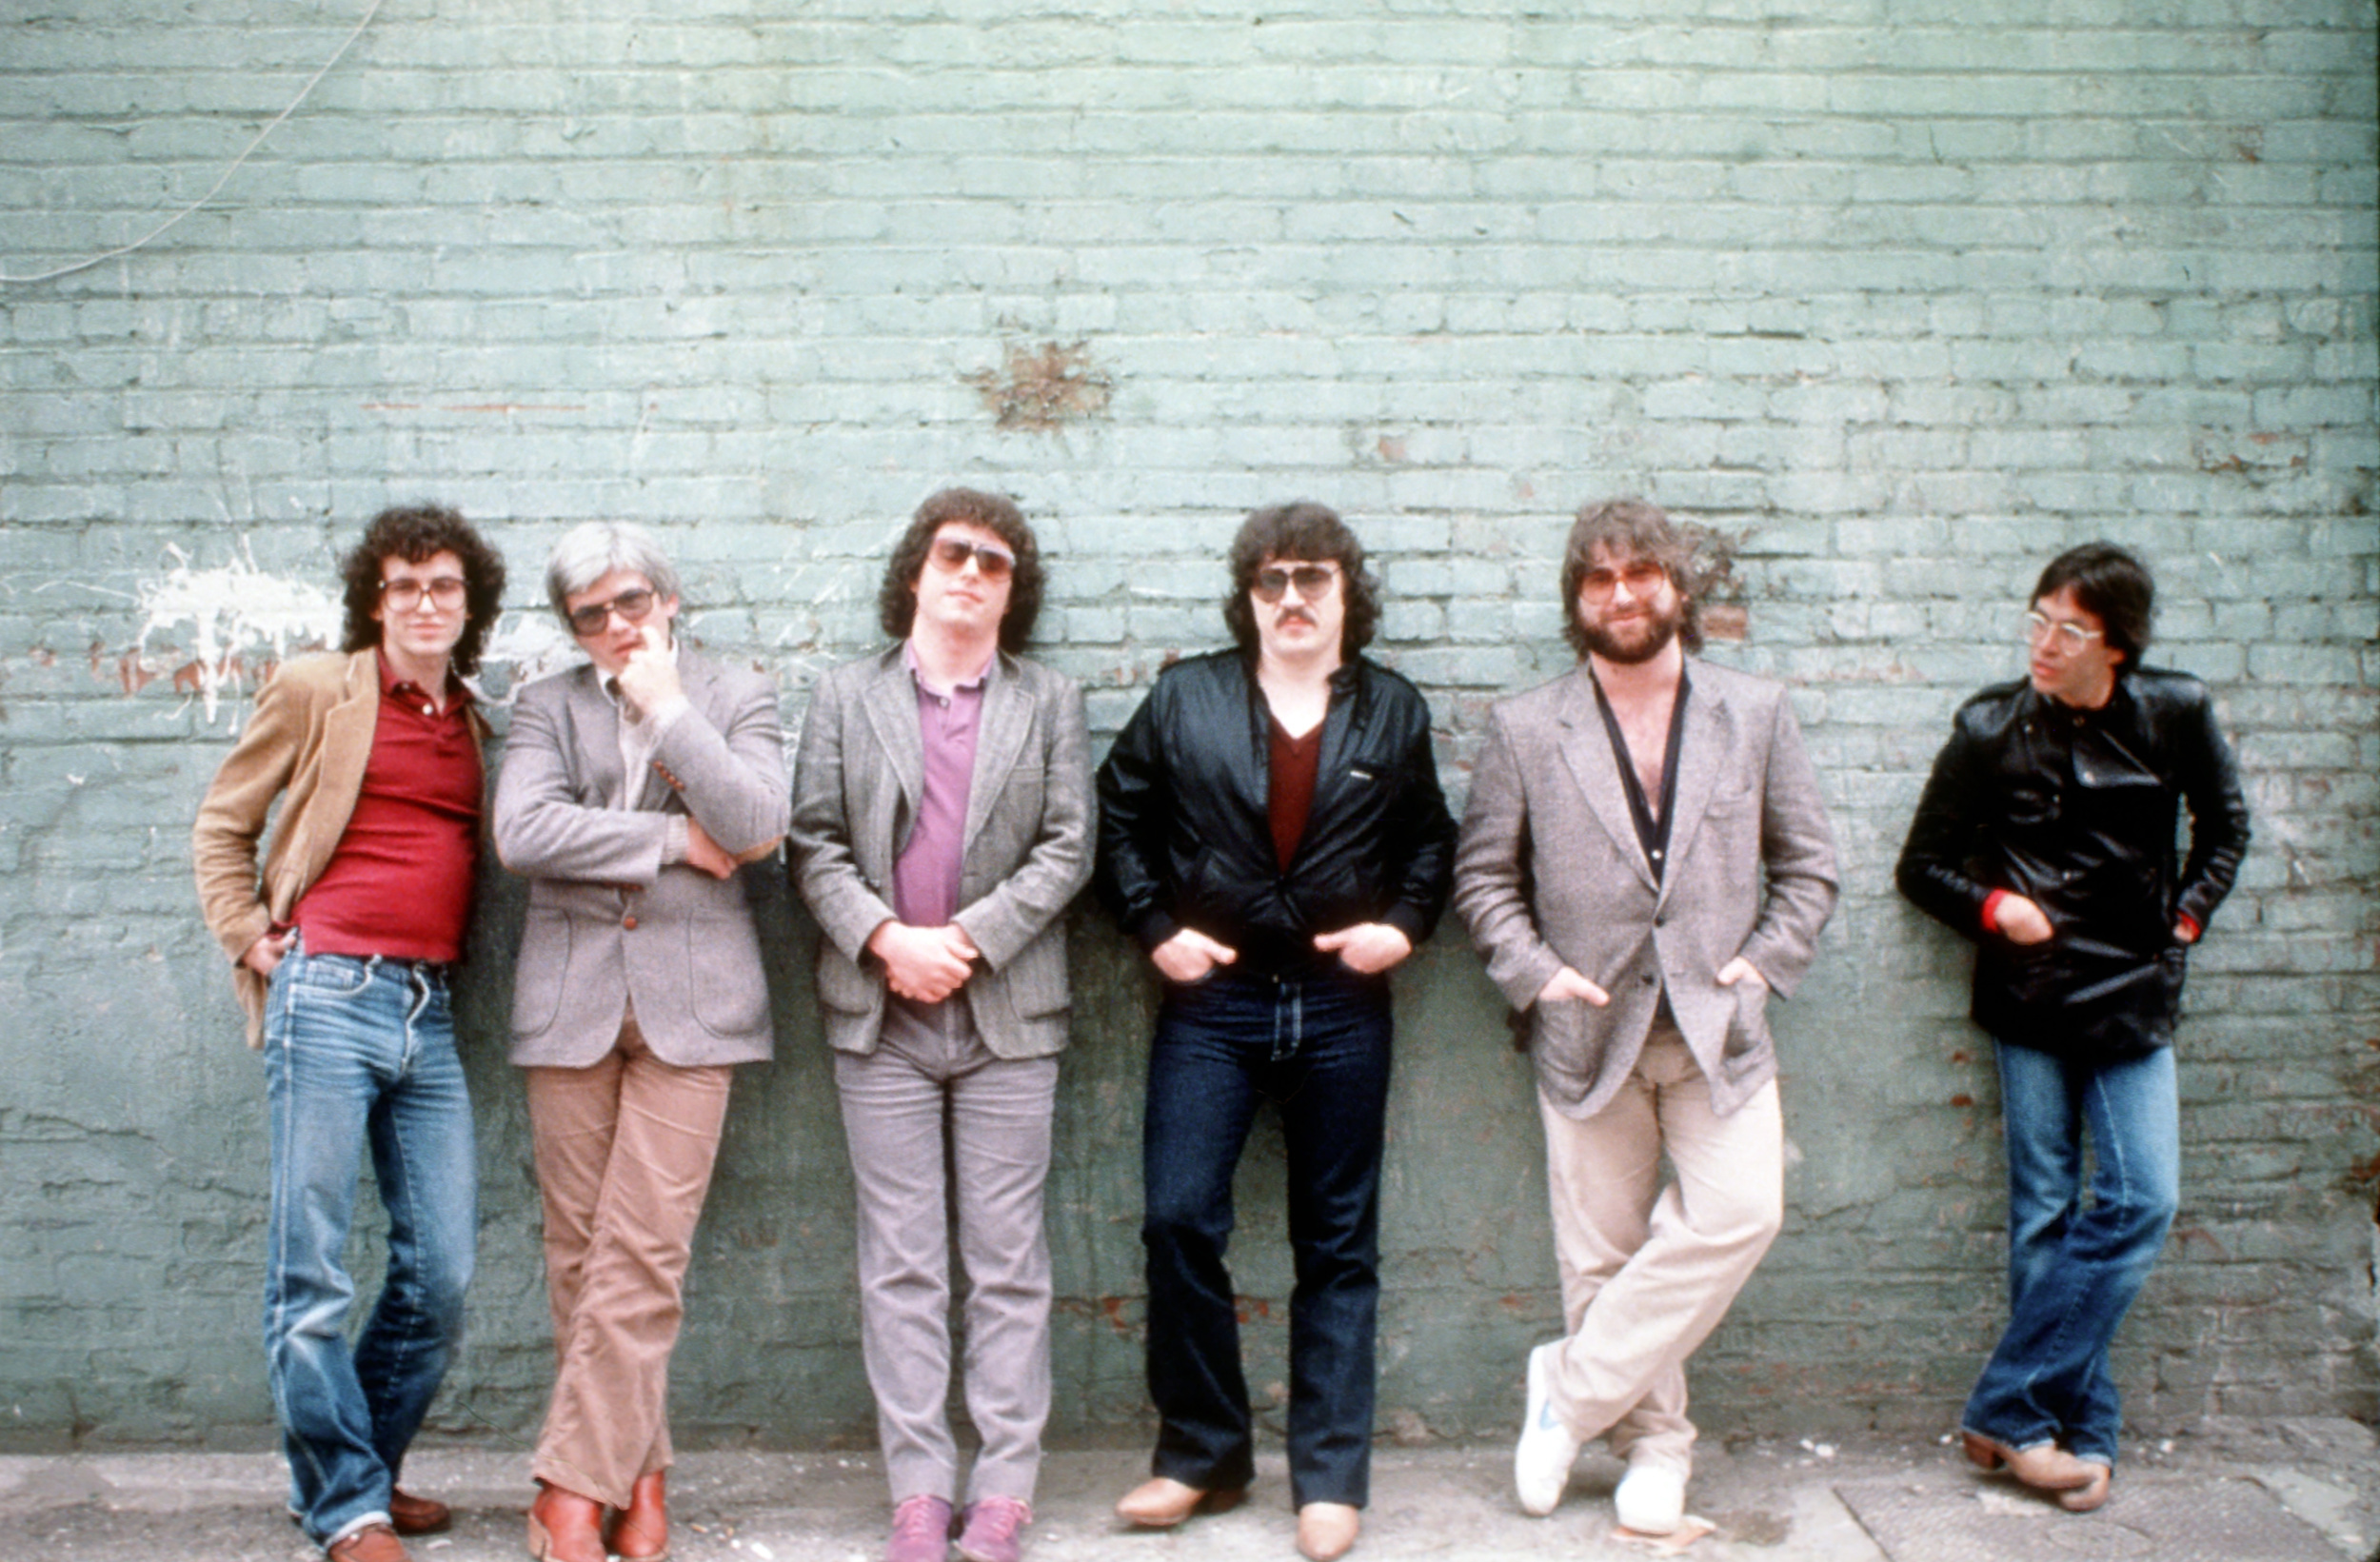 <p>Toto rightfully has a place in the yacht rock world, but the band also broke into the top-40, FM radio, and MTV mainstream with the release of 1982's <em>Toto IV</em>. <a href="https://www.youtube.com/watch?v=qmOLtTGvsbM">"Rosanna"</a> was a big reason for the album's success, peaking at No. 2 on <em>Billboard</em>'s Hot 100 and winning the Record of the Year Grammy Award. Sure, it's not typical yacht rock fare, per se. It's certainly heavier than other popular tracks on this list, but it's certainly a product of AOR and still routinely played in dentist offices throughout America. </p><p>You may also like: <a href='https://www.yardbarker.com/entertainment/articles/20_screen_adaptations_that_did_the_book_justice/s1__39471205'>20 screen adaptations that did the book justice</a></p>